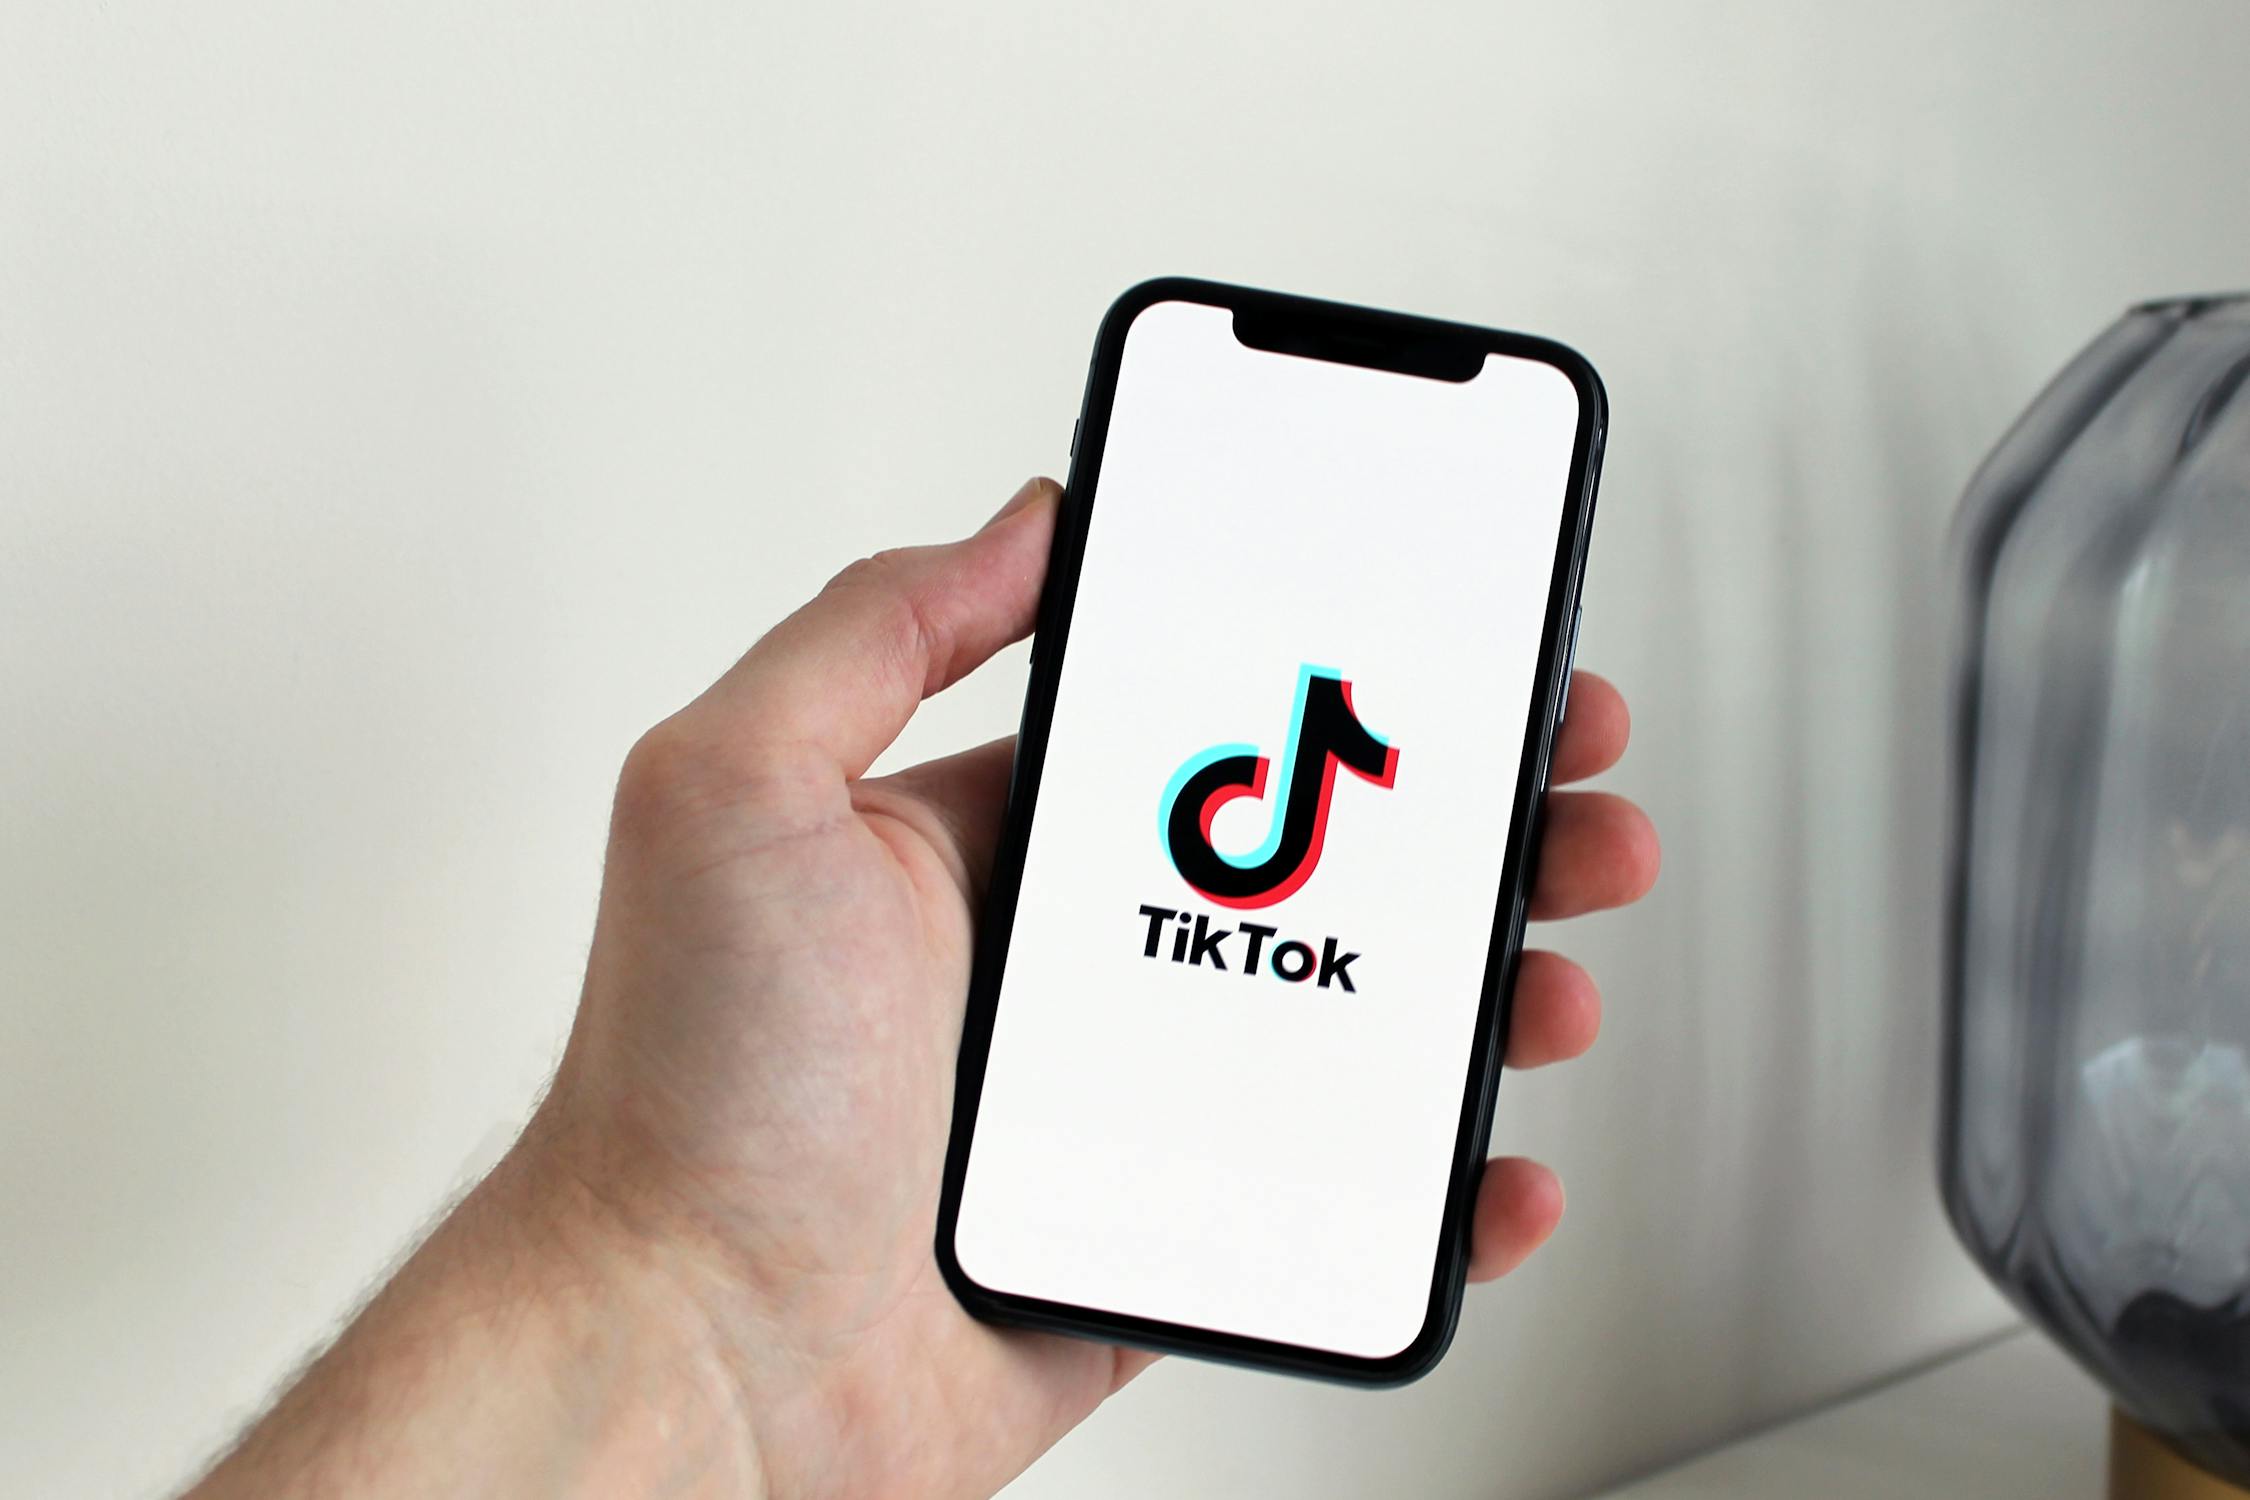 The popular Chinese video app TikTok has been removed from all devices under its control.